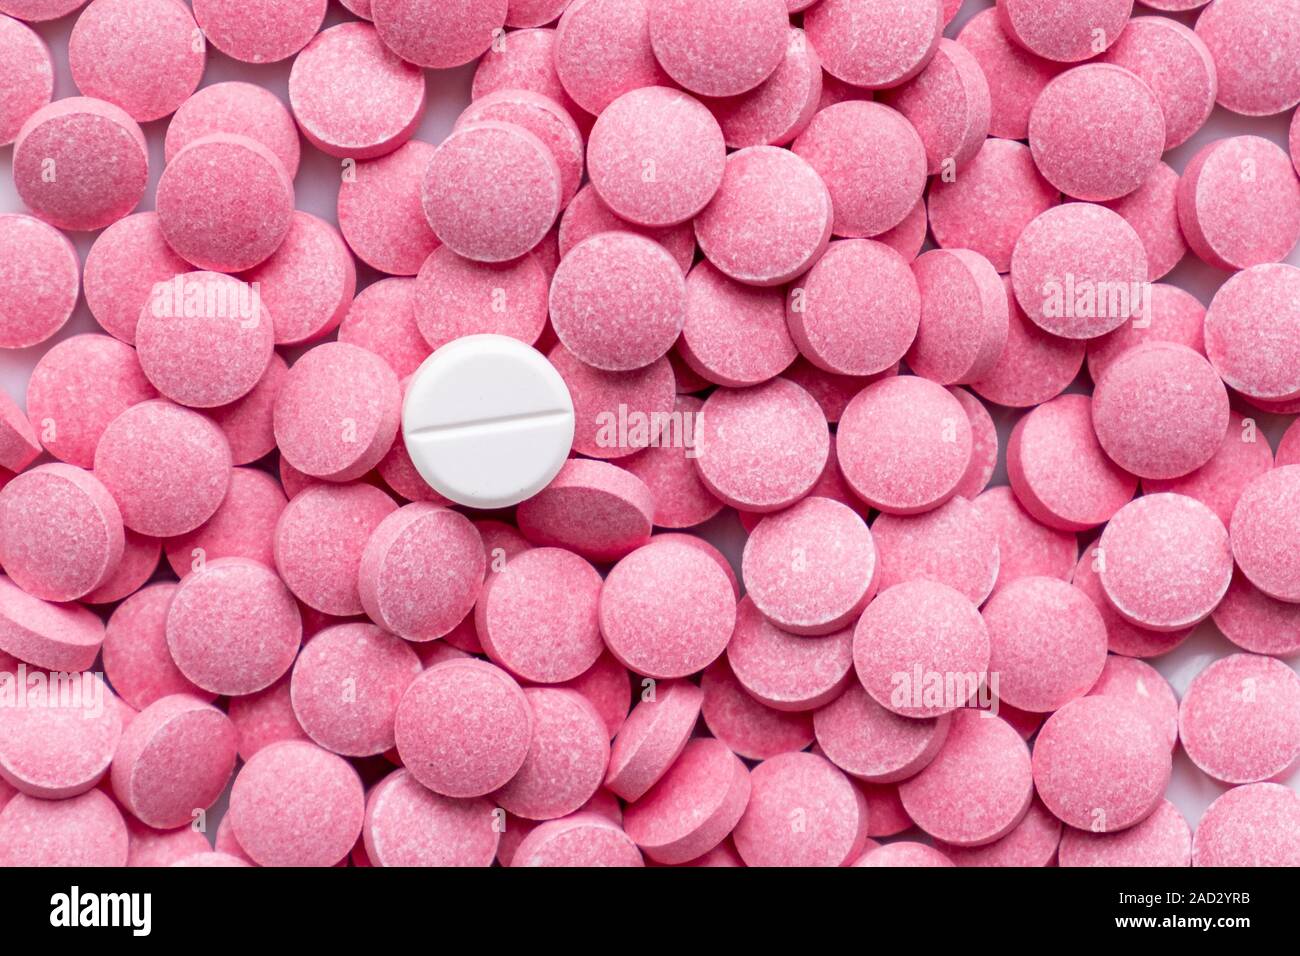 Pile of pink pills and around a white one. Medication, self-treatment or placebo concept: one tablet is different from the lot of others Stock Photo